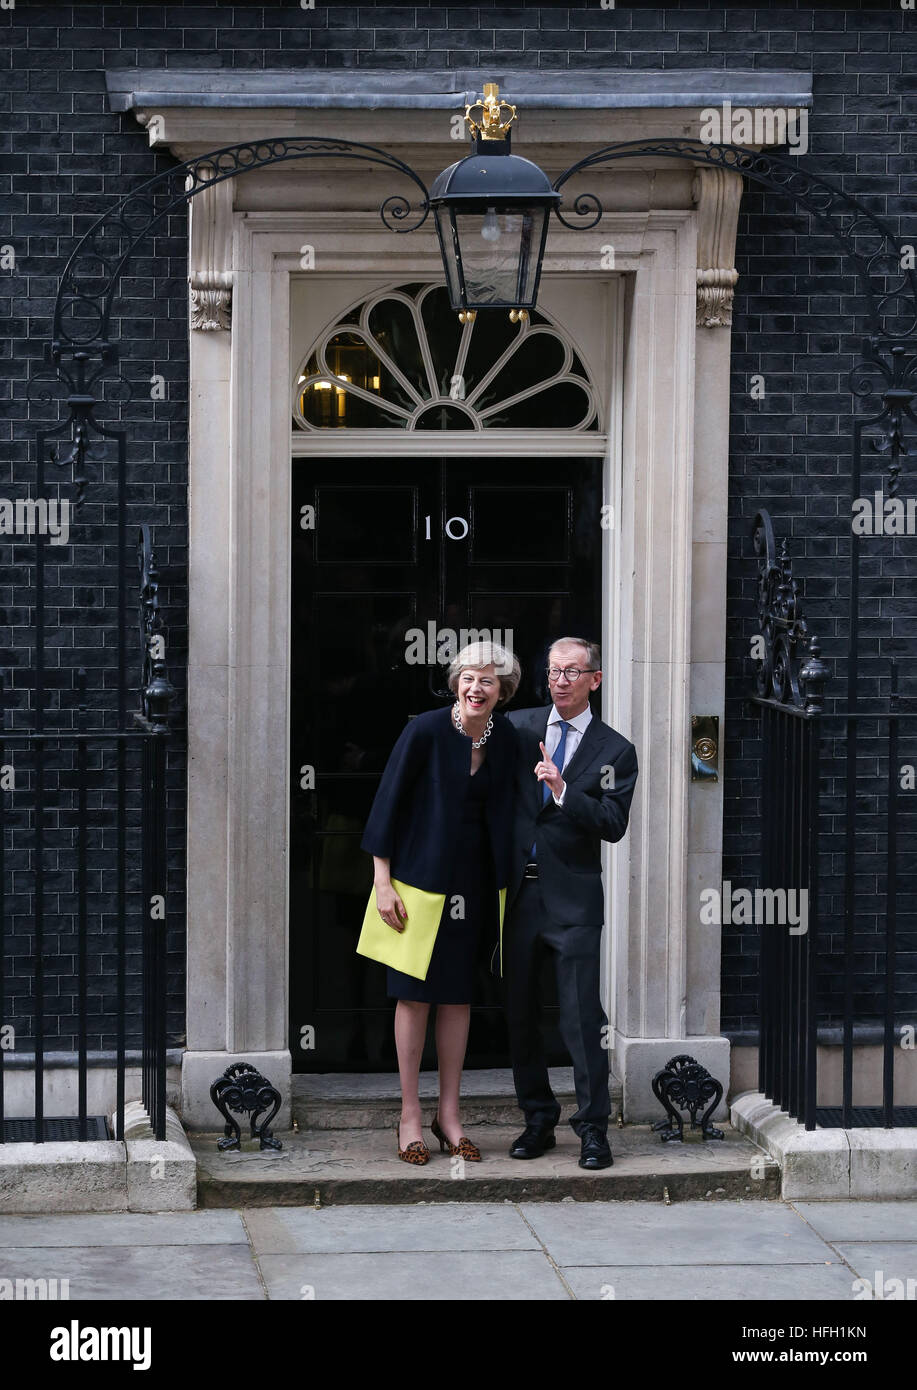 Beijing, China. 13th July, 2016. Britain's new Prime Minister Theresa May(L) and her husband pose for photos in front of 10 Downing Street in London, Britain on July 13, 2016. © Han Yan/Xinhua/Alamy Live News Stock Photo